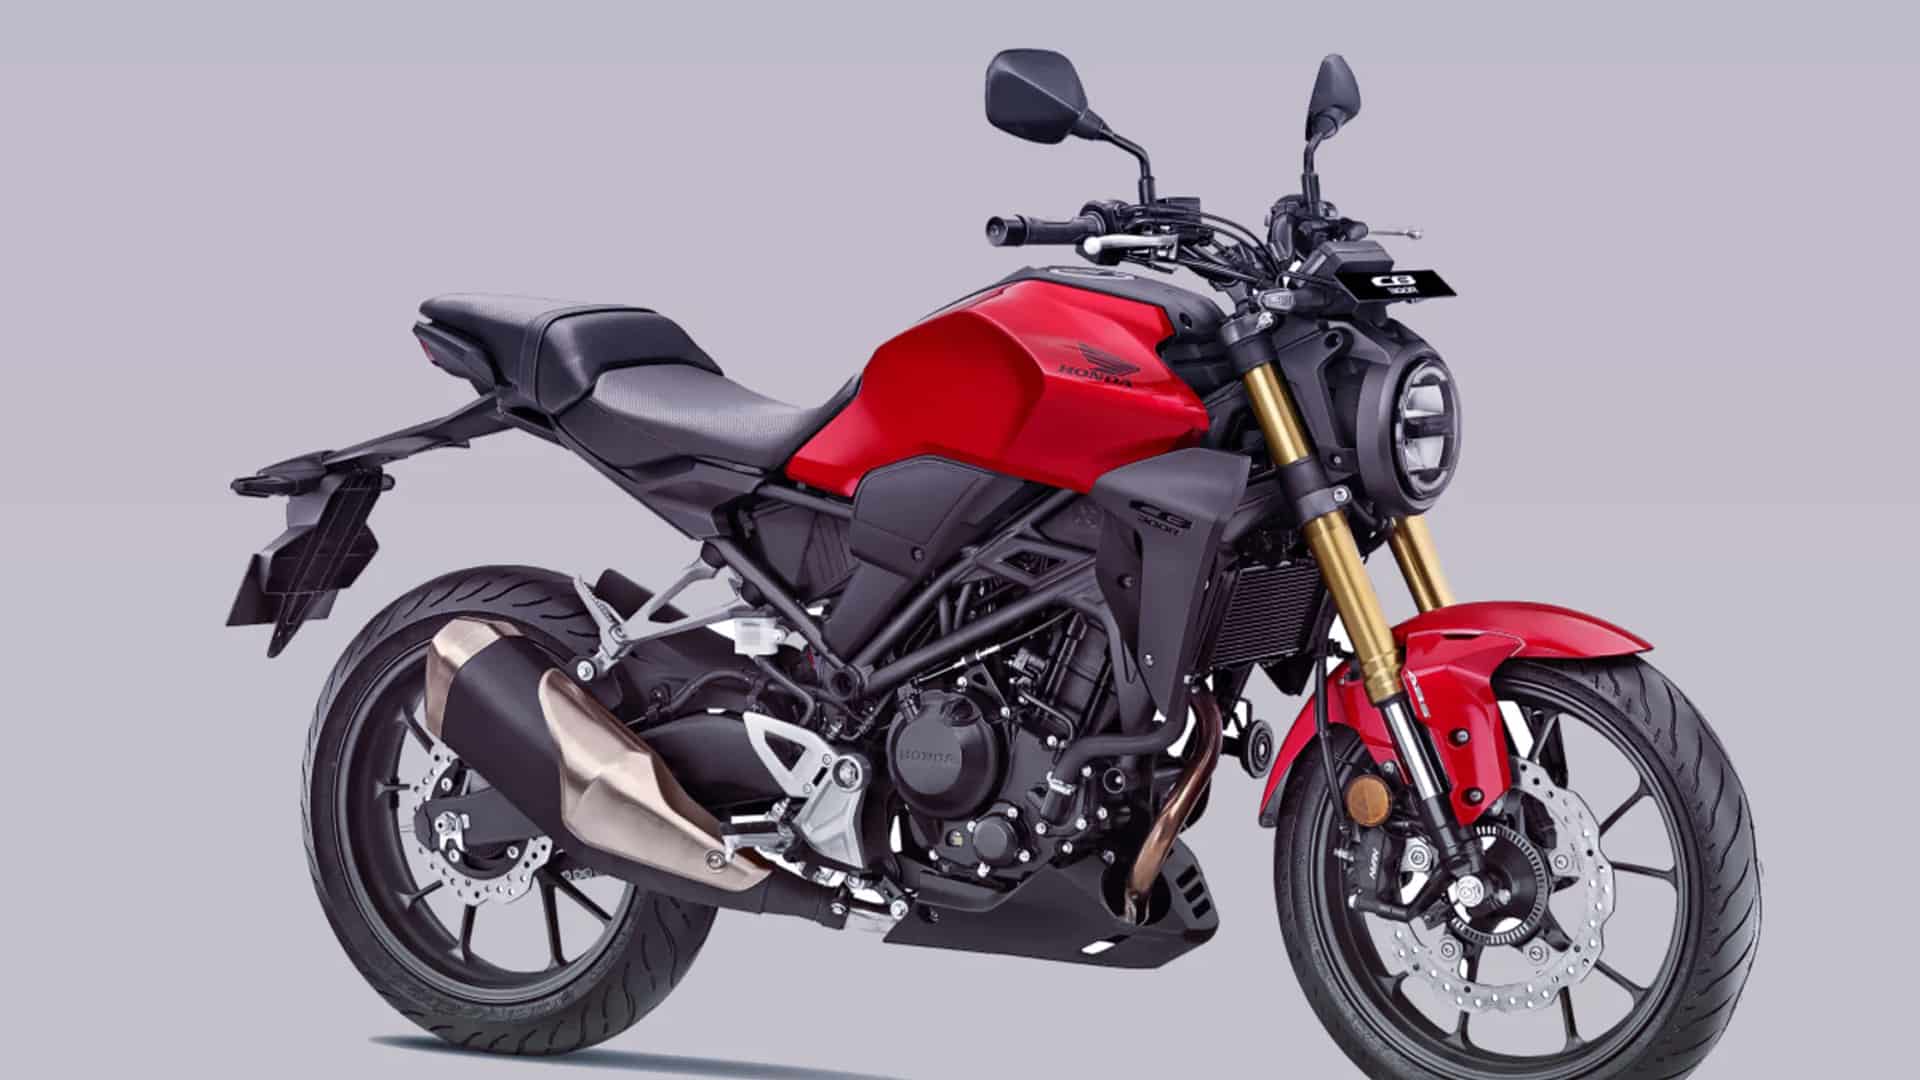 Honda Motorcycle launches new bike CB300R at Rs 2.77 lakh